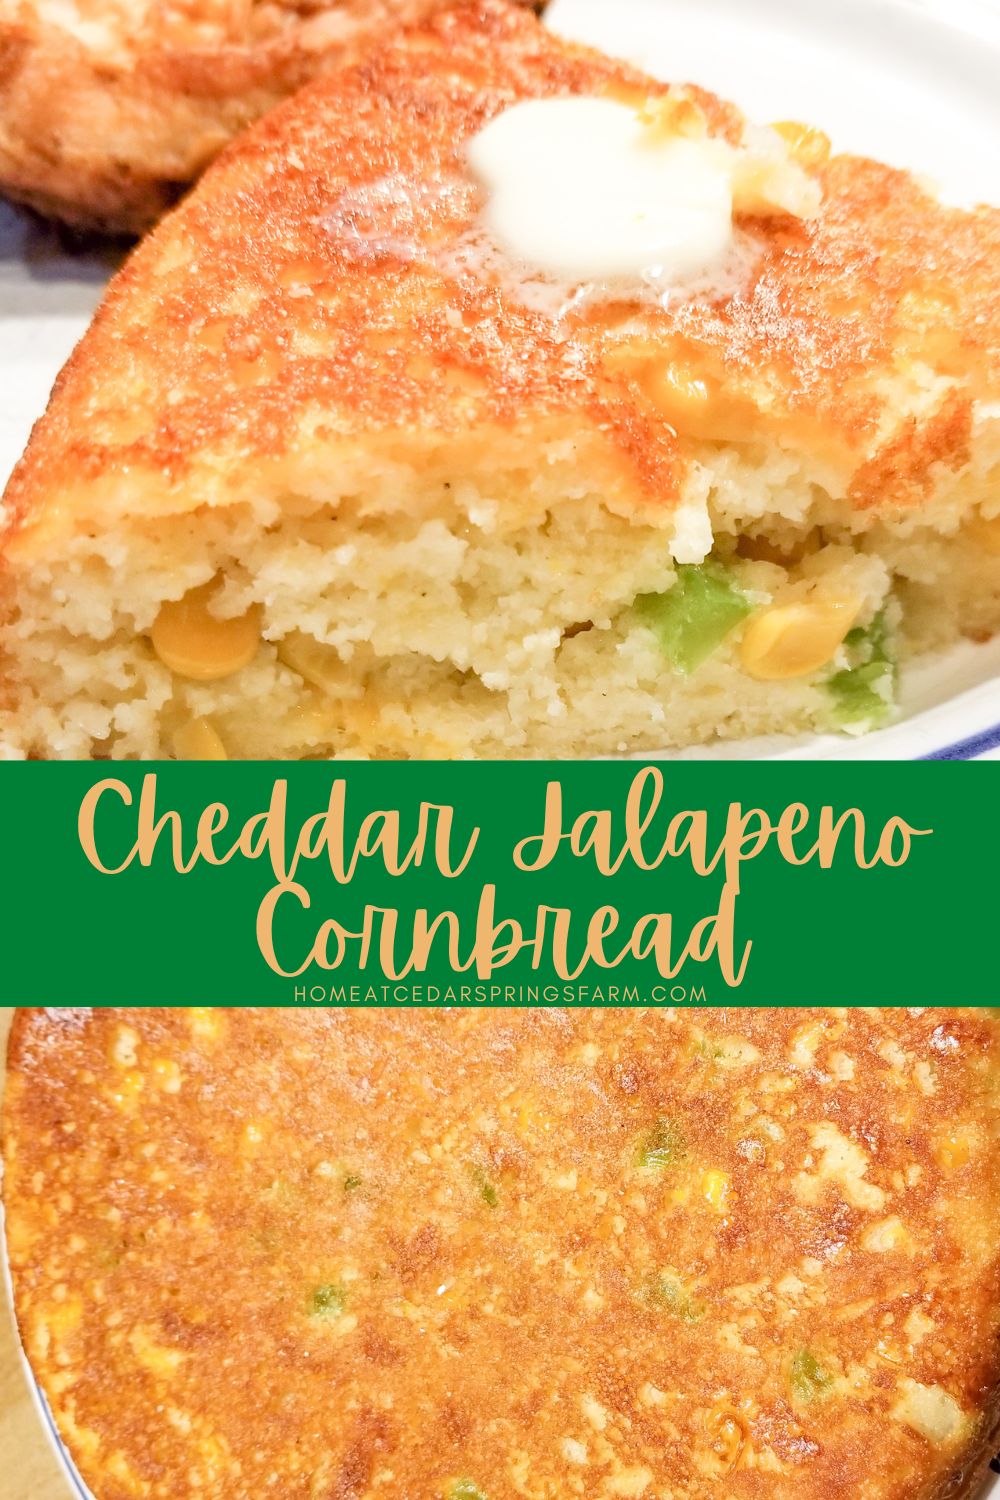 cheddar jalapeno cornbread on a plate with text overlay.